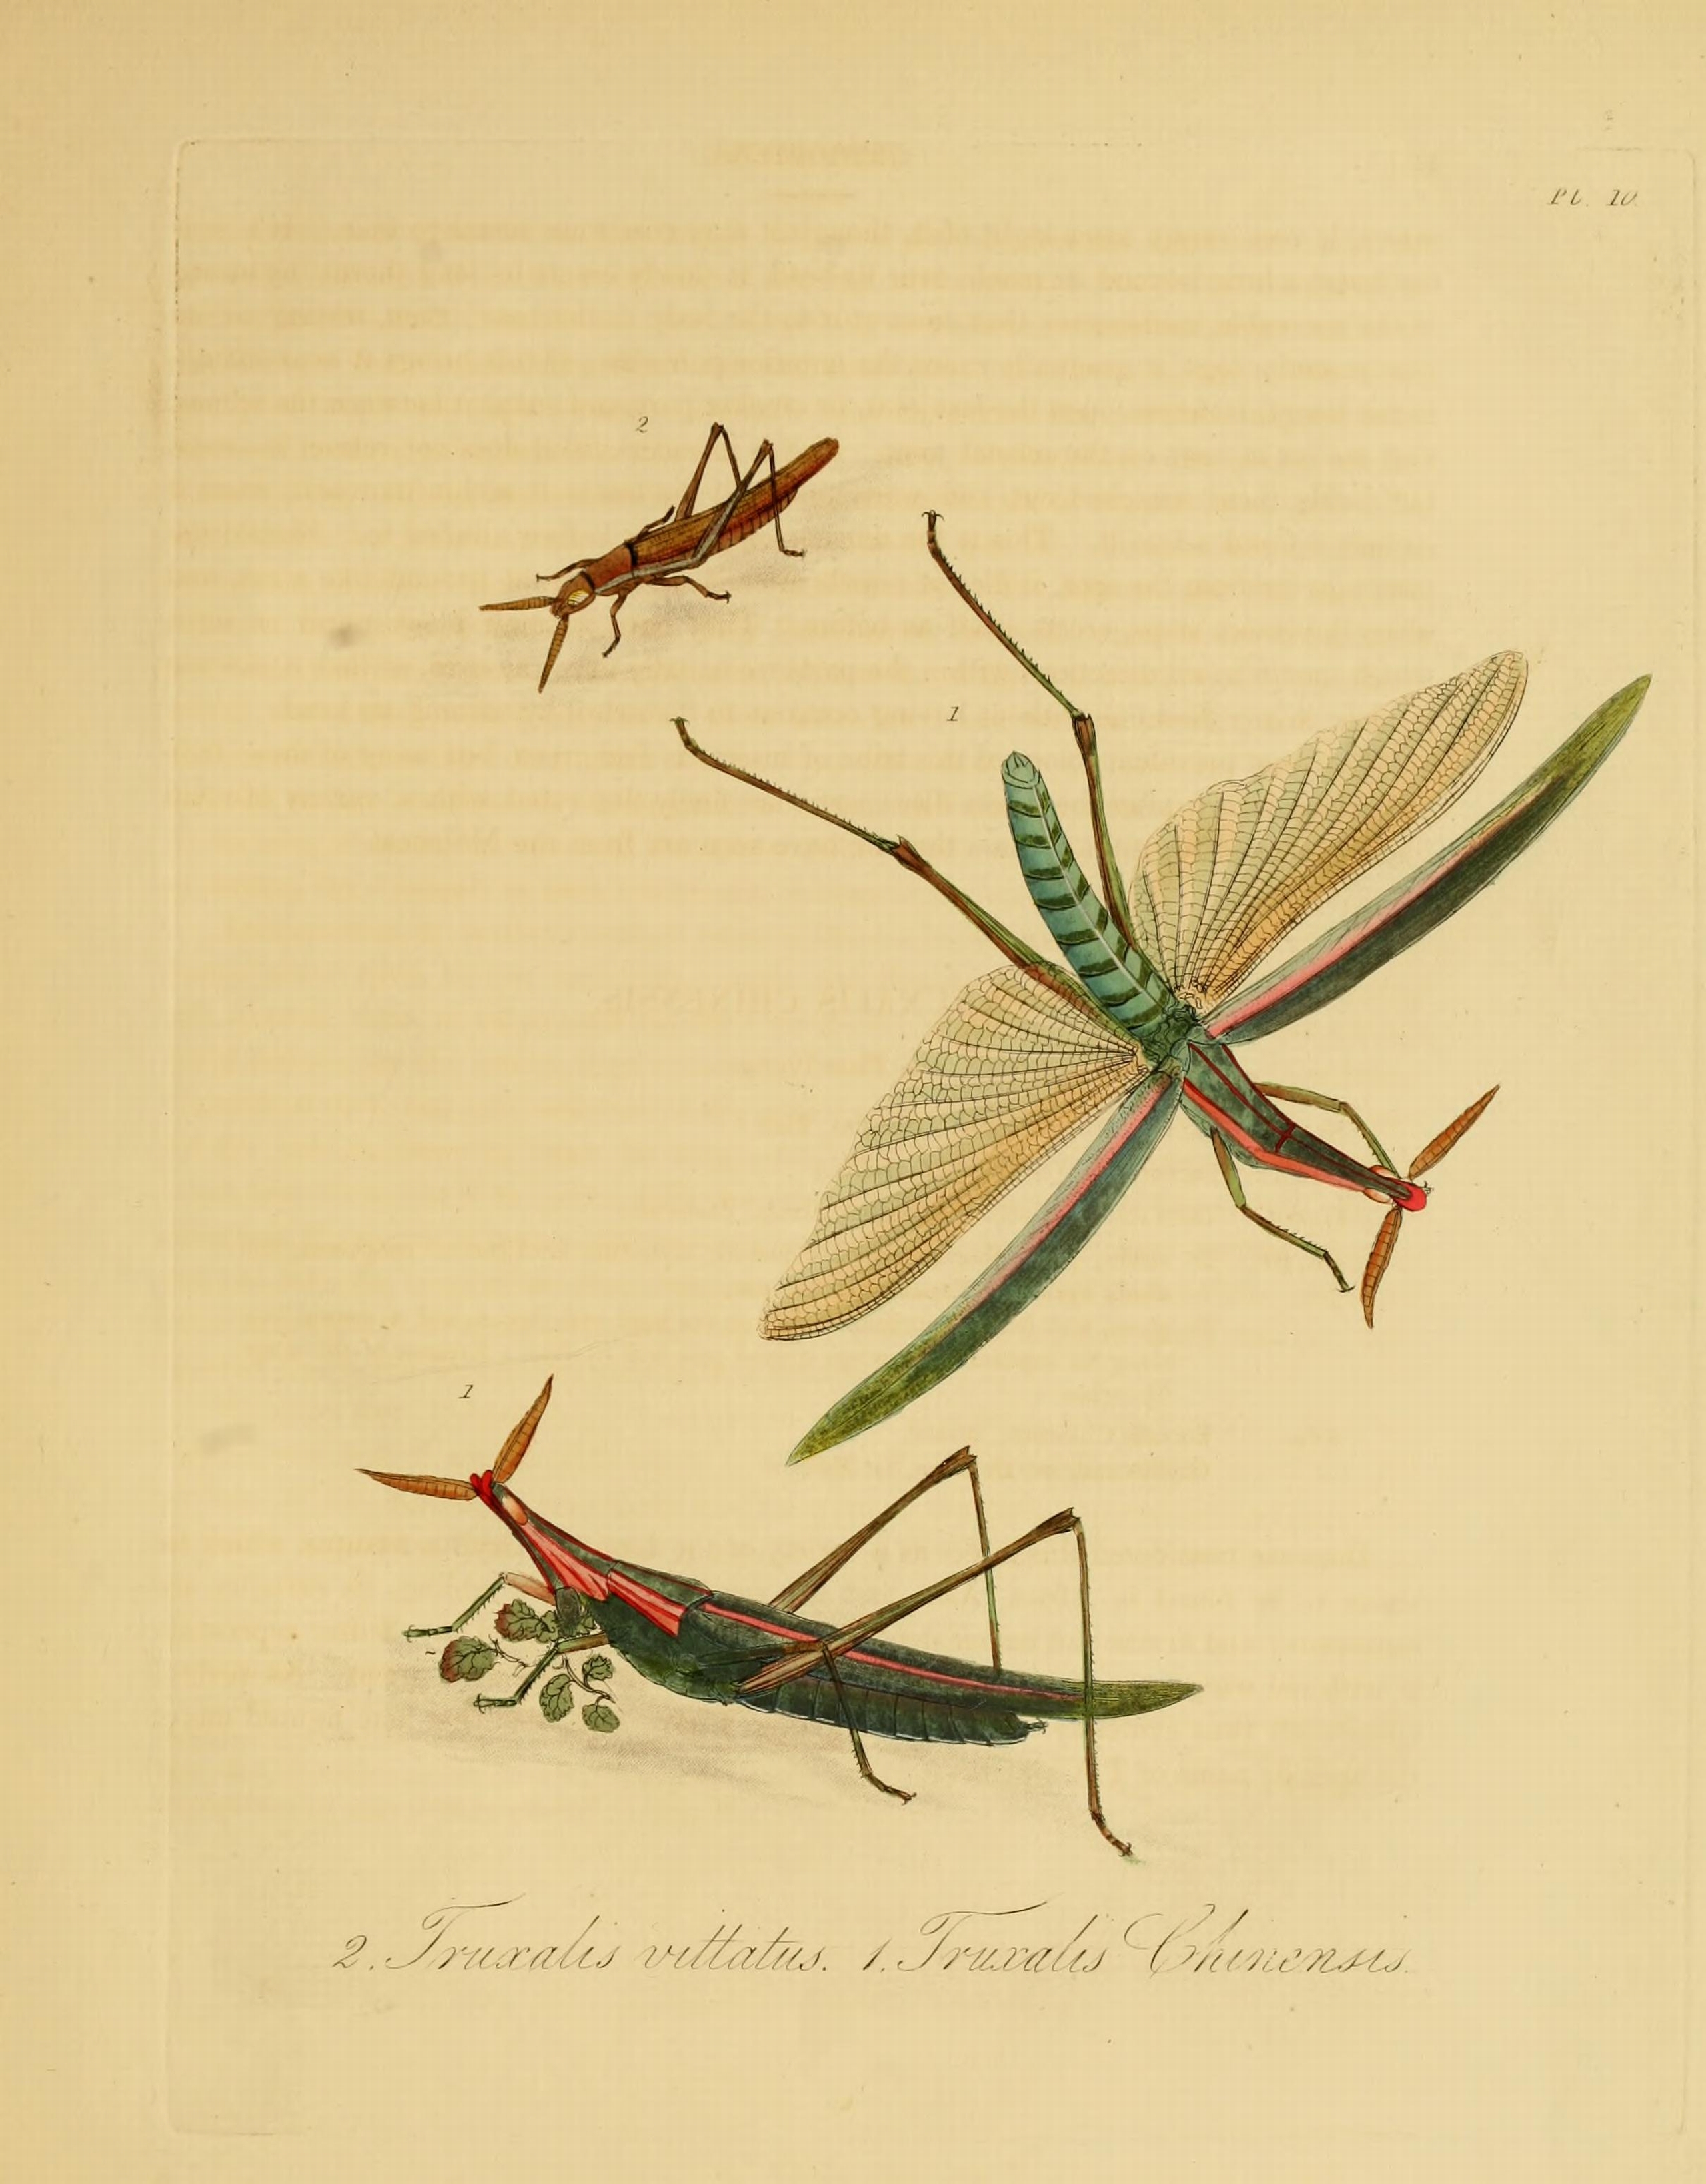 Donovan - Insects of China, 1838 - pl 10